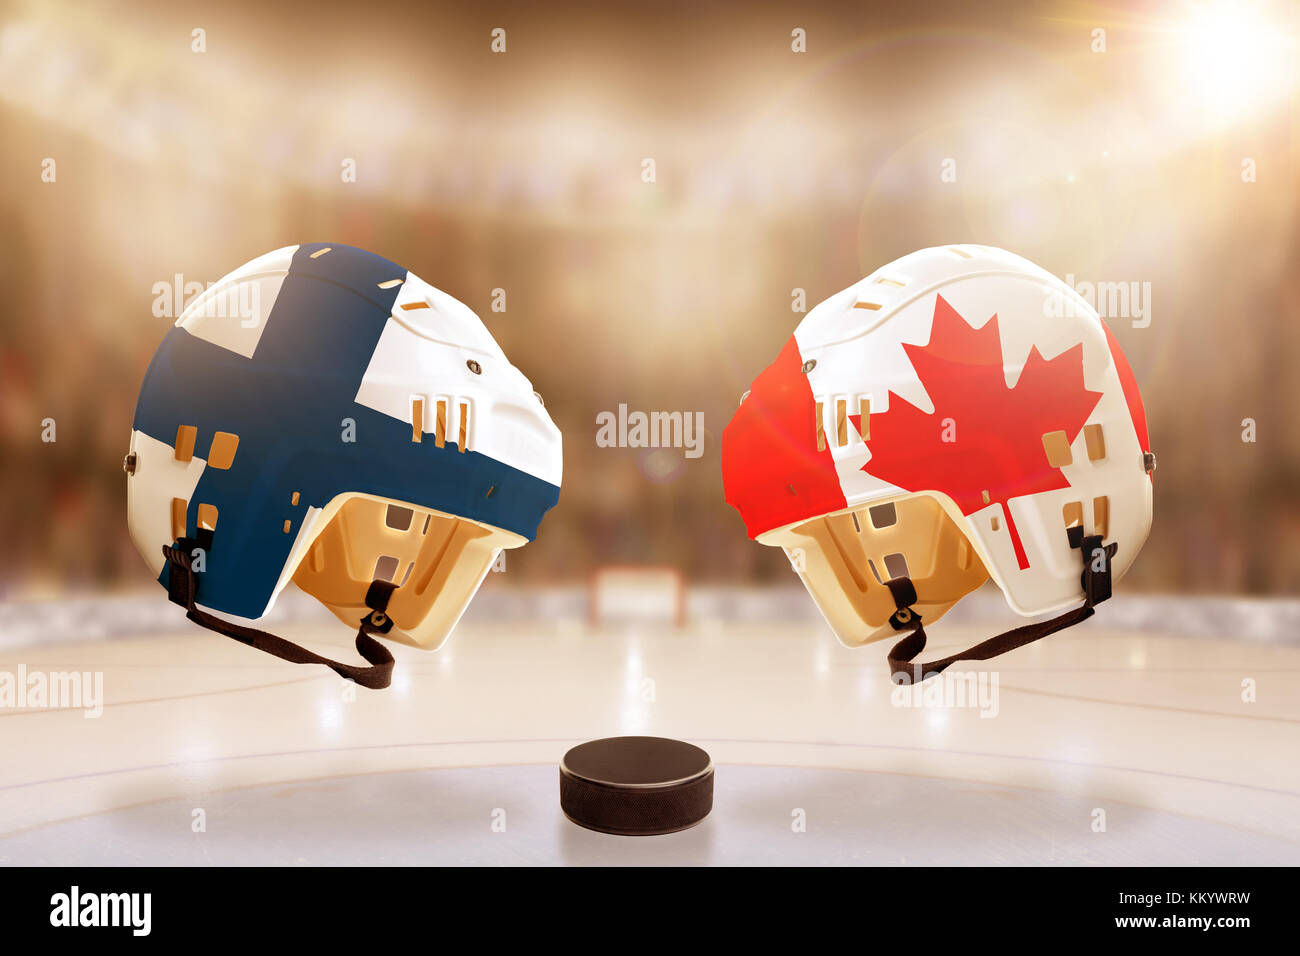 Low angle view of hockey helmets with Canada and Finland flags painted and hockey puck on ice in brightly lit stadium background. Concept of intense r Stock Photo